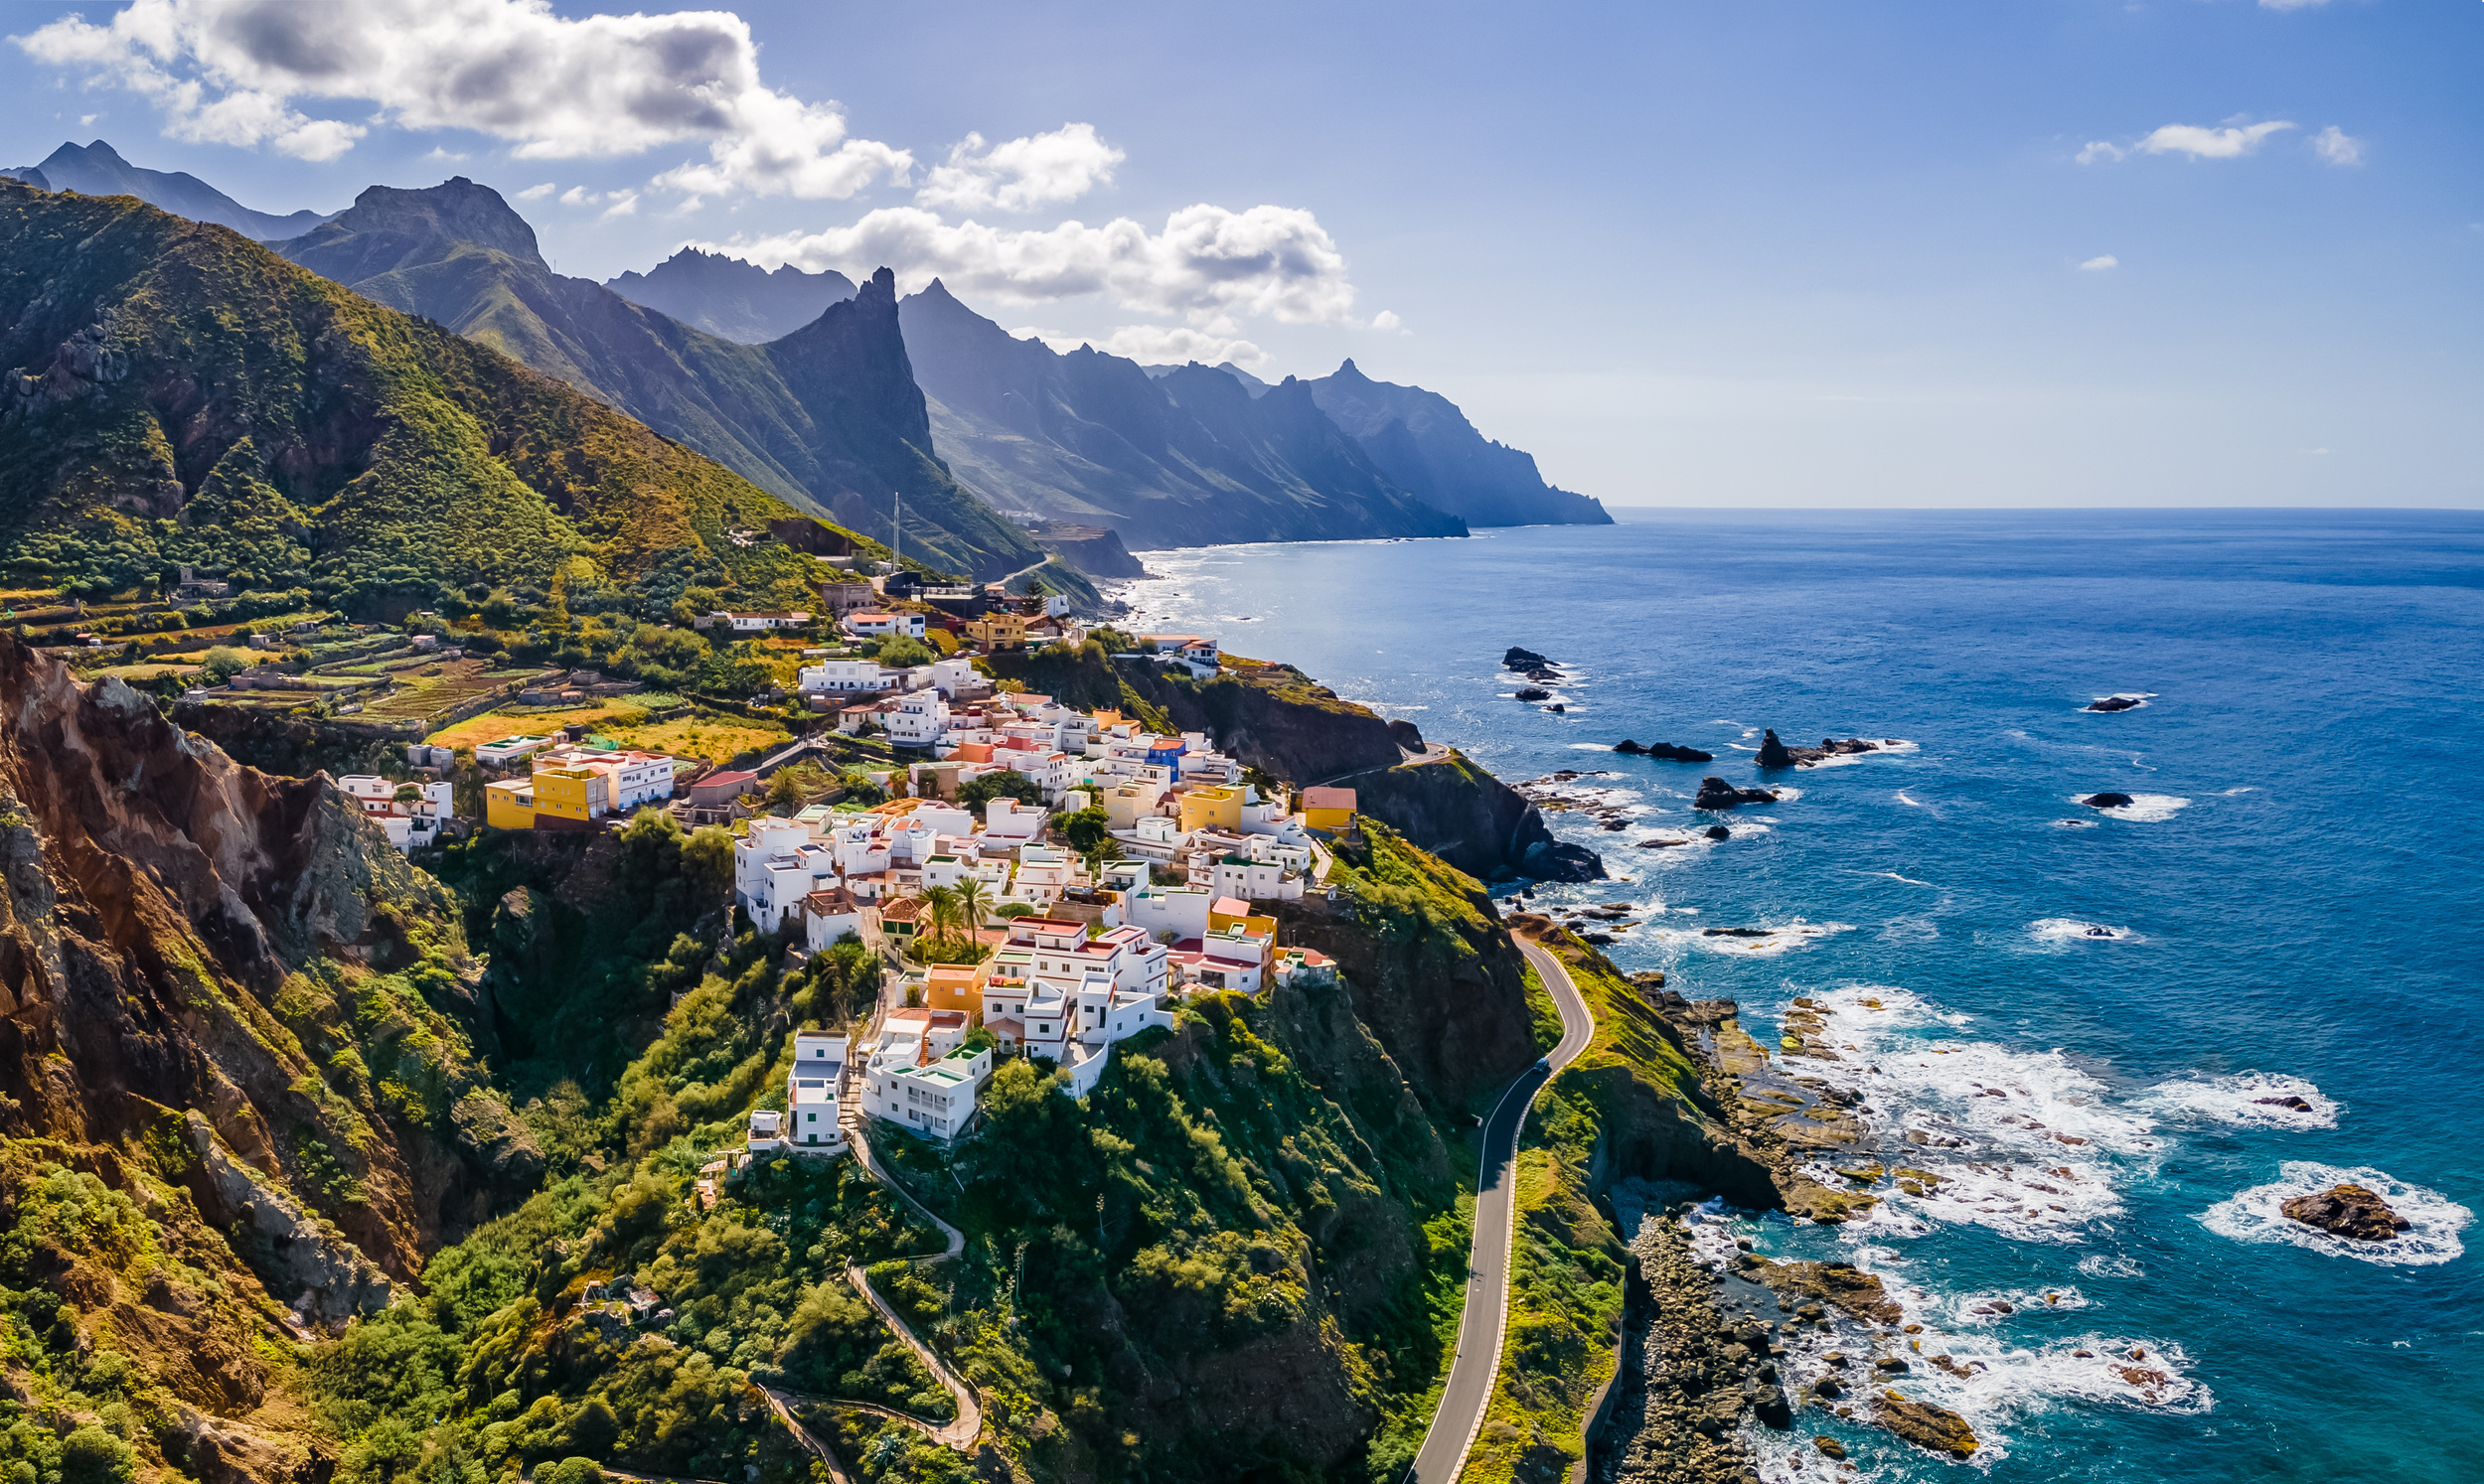 <p>Some remote islands are totally luxurious, like the Canary Islands off the coast of Spain. Though a little difficult to get to, the Canary Islands are the best combination of European fanciness and island seclusion. </p><p><a href='https://www.msn.com/en-us/community/channel/vid-cj9pqbr0vn9in2b6ddcd8sfgpfq6x6utp44fssrv6mc2gtybw0us'>Did you enjoy this slideshow? Follow us on MSN to see more of our exclusive lifestyle content.</a></p>